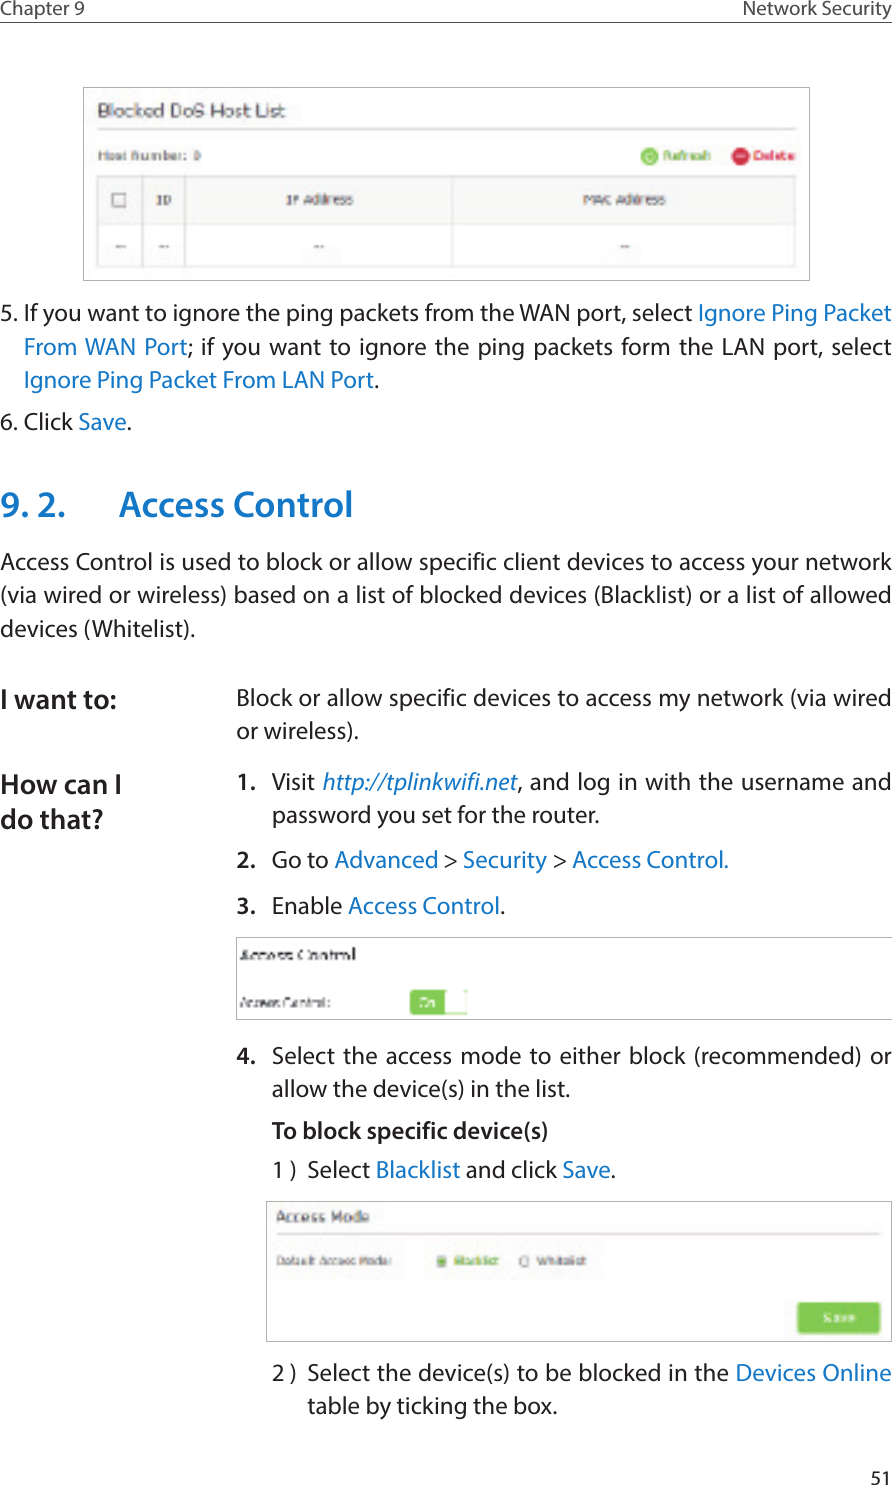 51Chapter 9 Network Security5. If you want to ignore the ping packets from the WAN port, select Ignore Ping Packet From WAN Port; if you want to ignore the ping packets form the LAN port, select Ignore Ping Packet From LAN Port.6. Click Save.9. 2.  Access ControlAccess Control is used to block or allow specific client devices to access your network (via wired or wireless) based on a list of blocked devices (Blacklist) or a list of allowed devices (Whitelist).Block or allow specific devices to access my network (via wired or wireless).1.  Visit http://tplinkwifi.net, and log in with the username and password you set for the router.2.  Go to Advanced &gt; Security &gt; Access Control.3.  Enable Access Control.4.  Select the access mode to either block (recommended) or allow the device(s) in the list.To block specific device(s)1 )  Select Blacklist and click Save.2 )  Select the device(s) to be blocked in the Devices Online table by ticking the box.I want to:How can I do that?